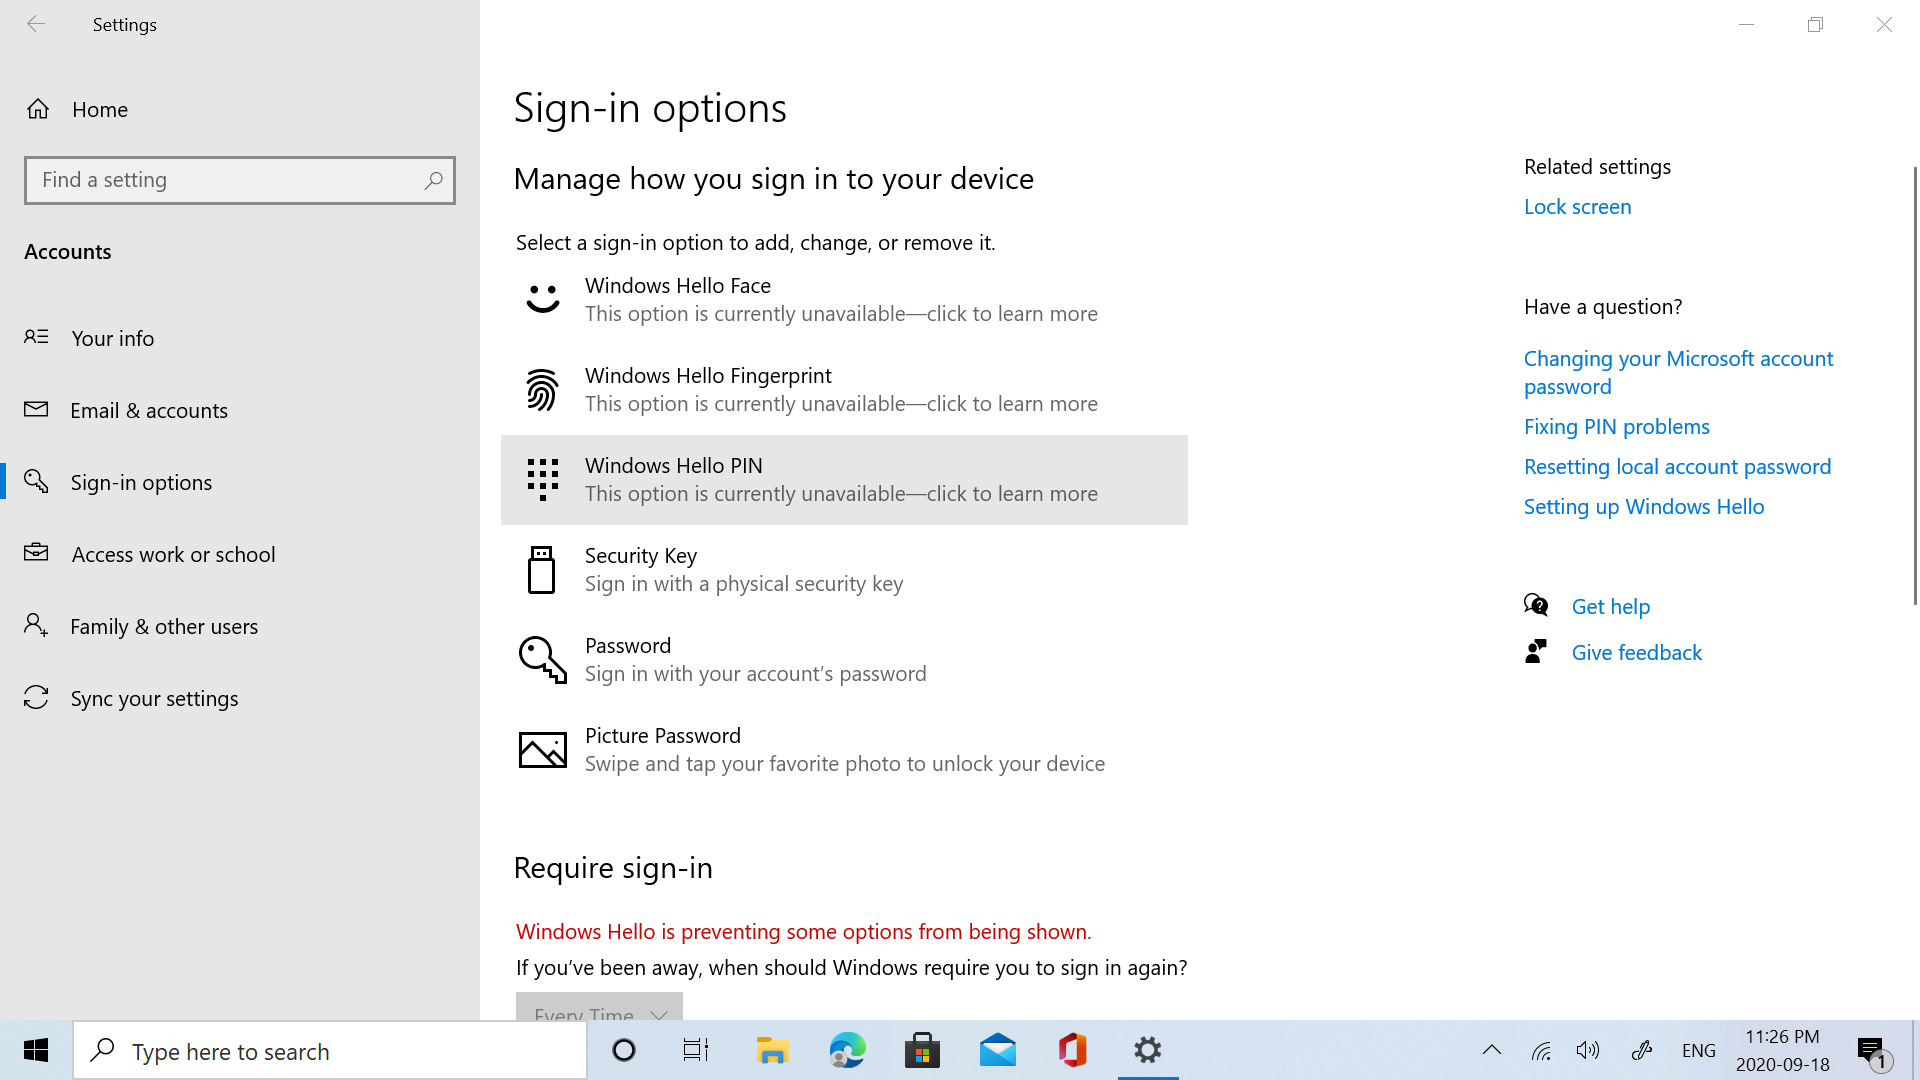 windows hello sign-in options are unavailable on my laptop fc2c6f9a-5949-4e47-98a0-d7b5d8e97f3b?upload=true.png